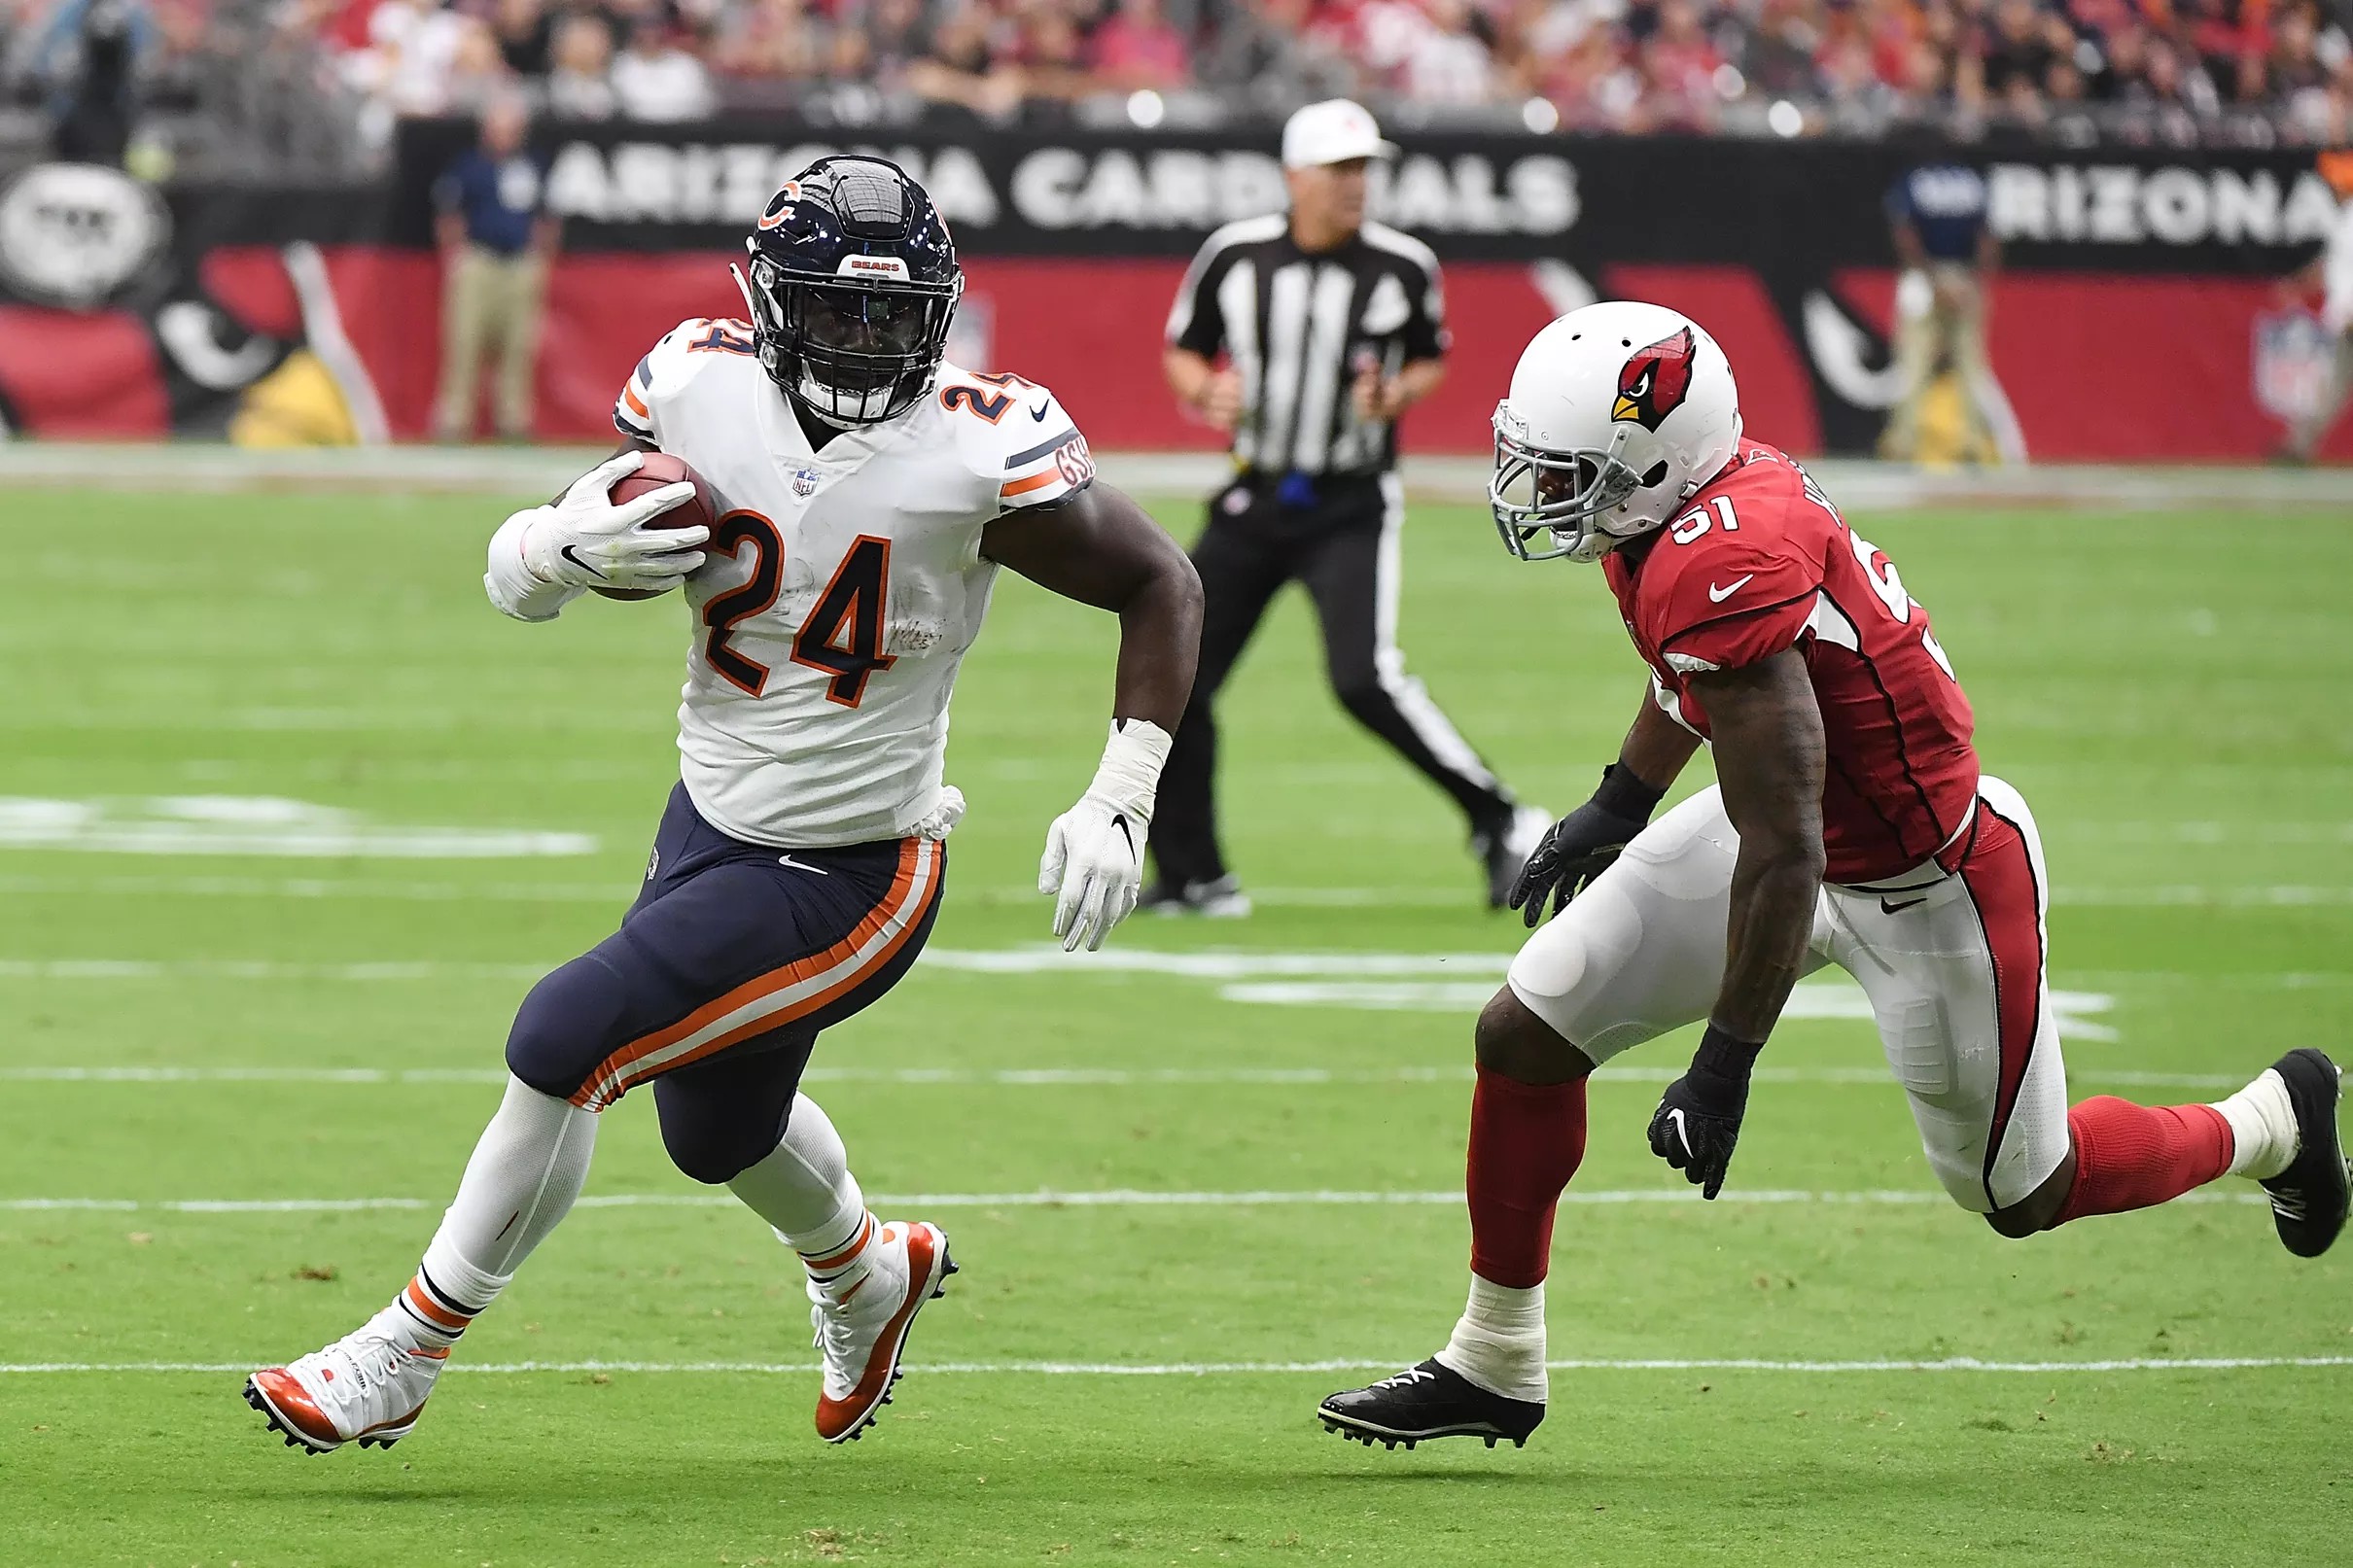 Bears vs. Cardinals Notes from an underwhelming 1614 victory